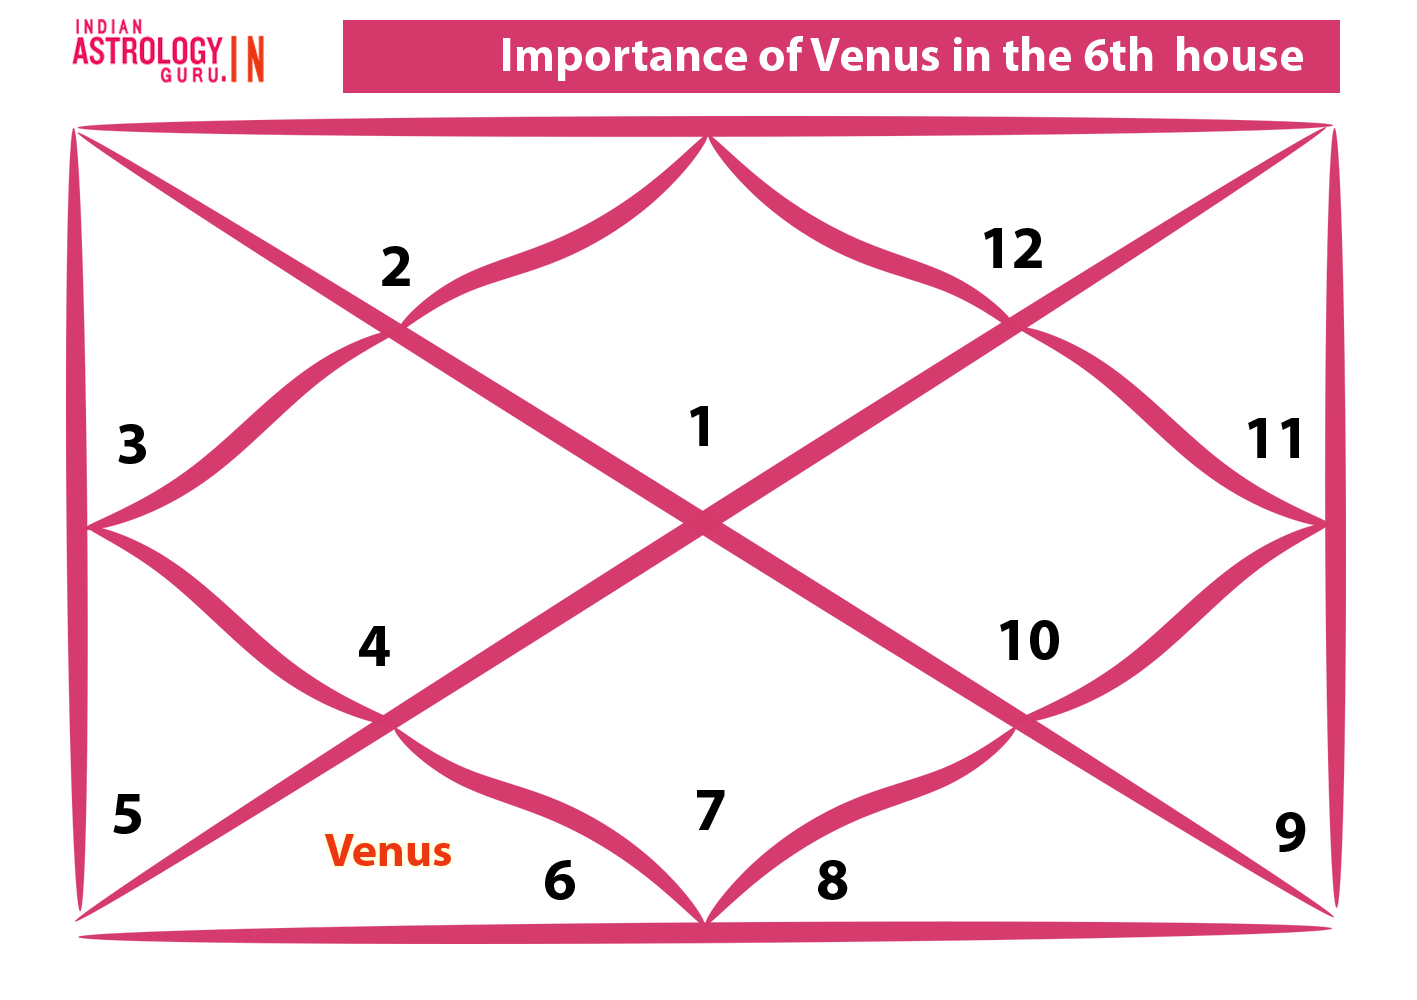 Venus in the 6th house